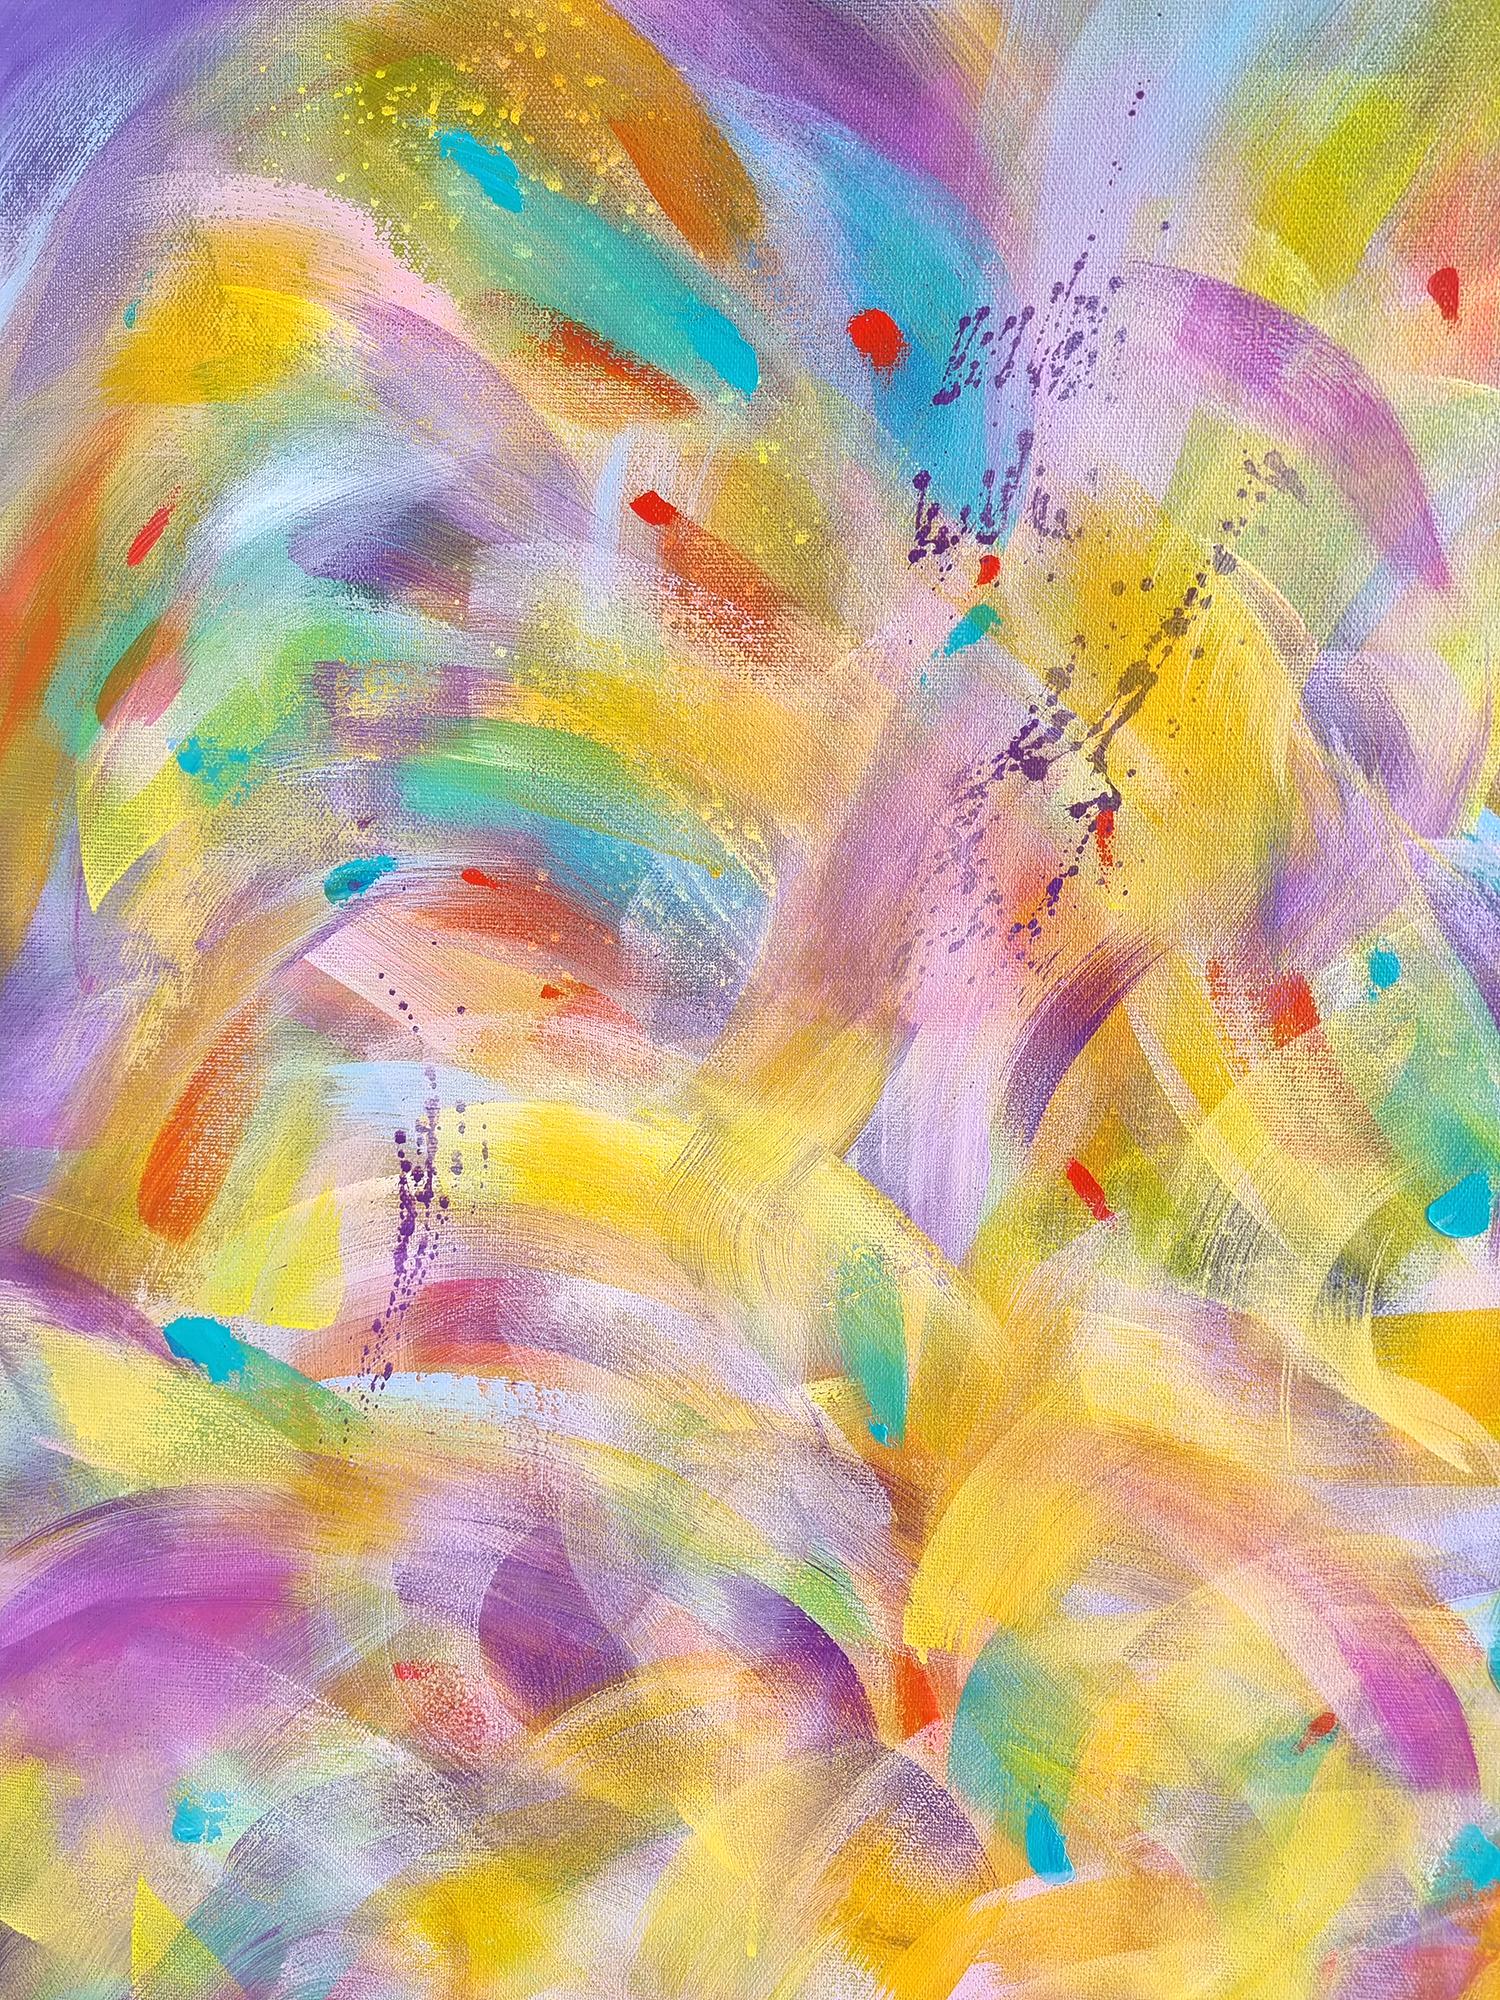 Spring light, Modern Colorful Abstract Painting 100x100cm by Anna Selina 5